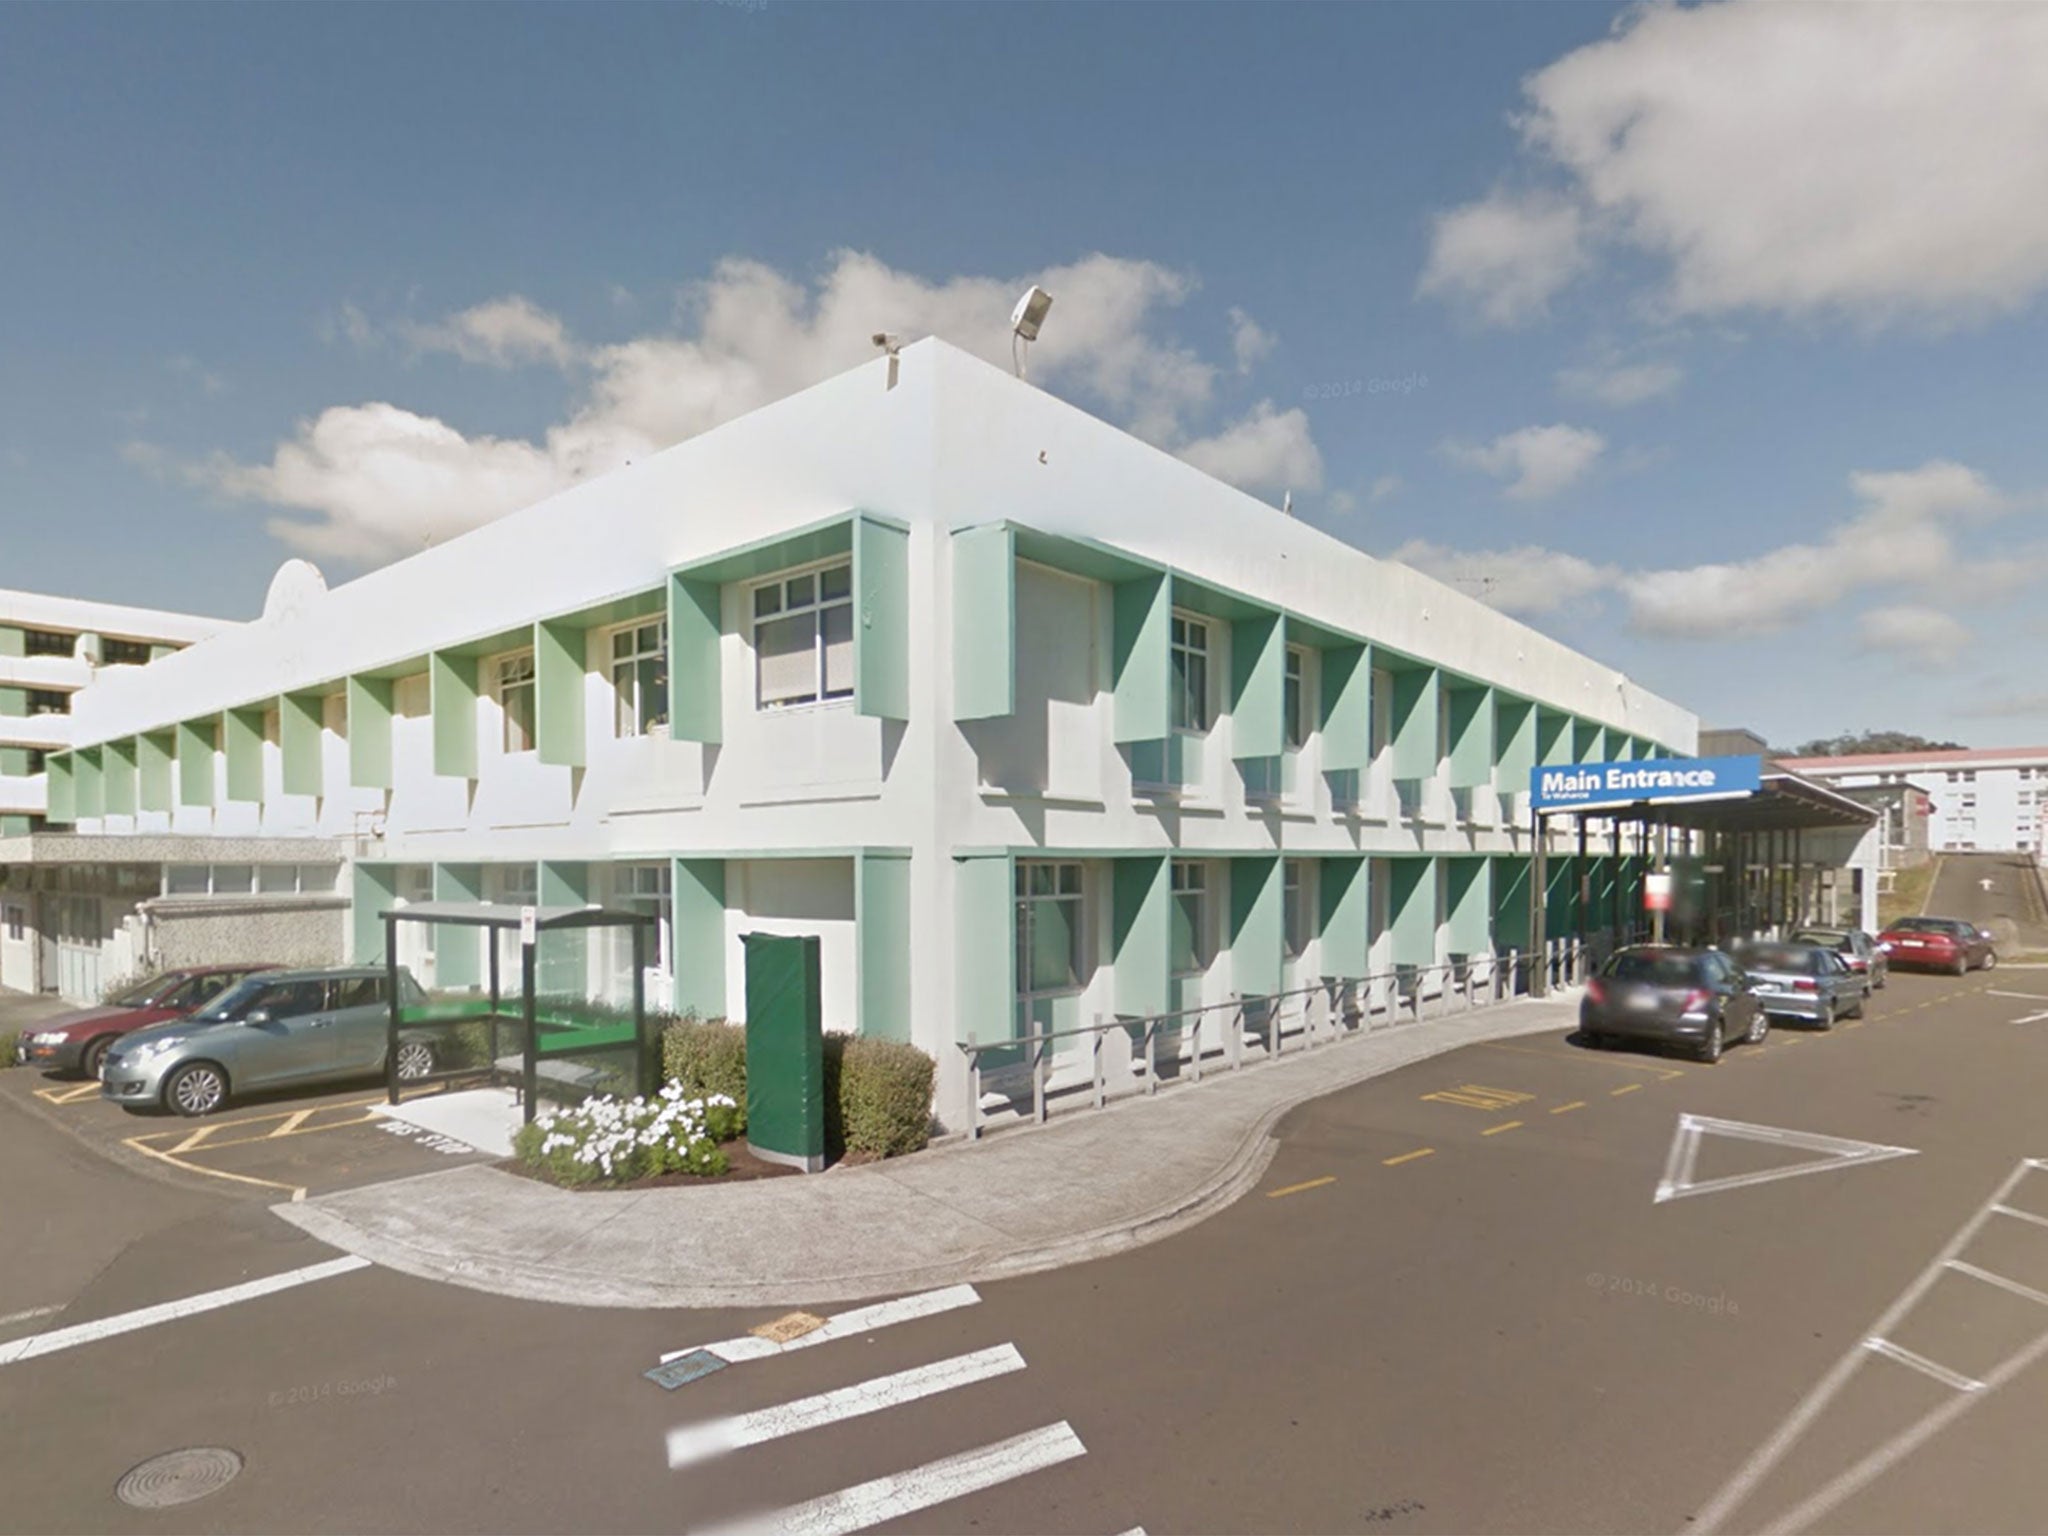 Wanganui Hospital, New Zealand, where a senior member of staff left her son in a car